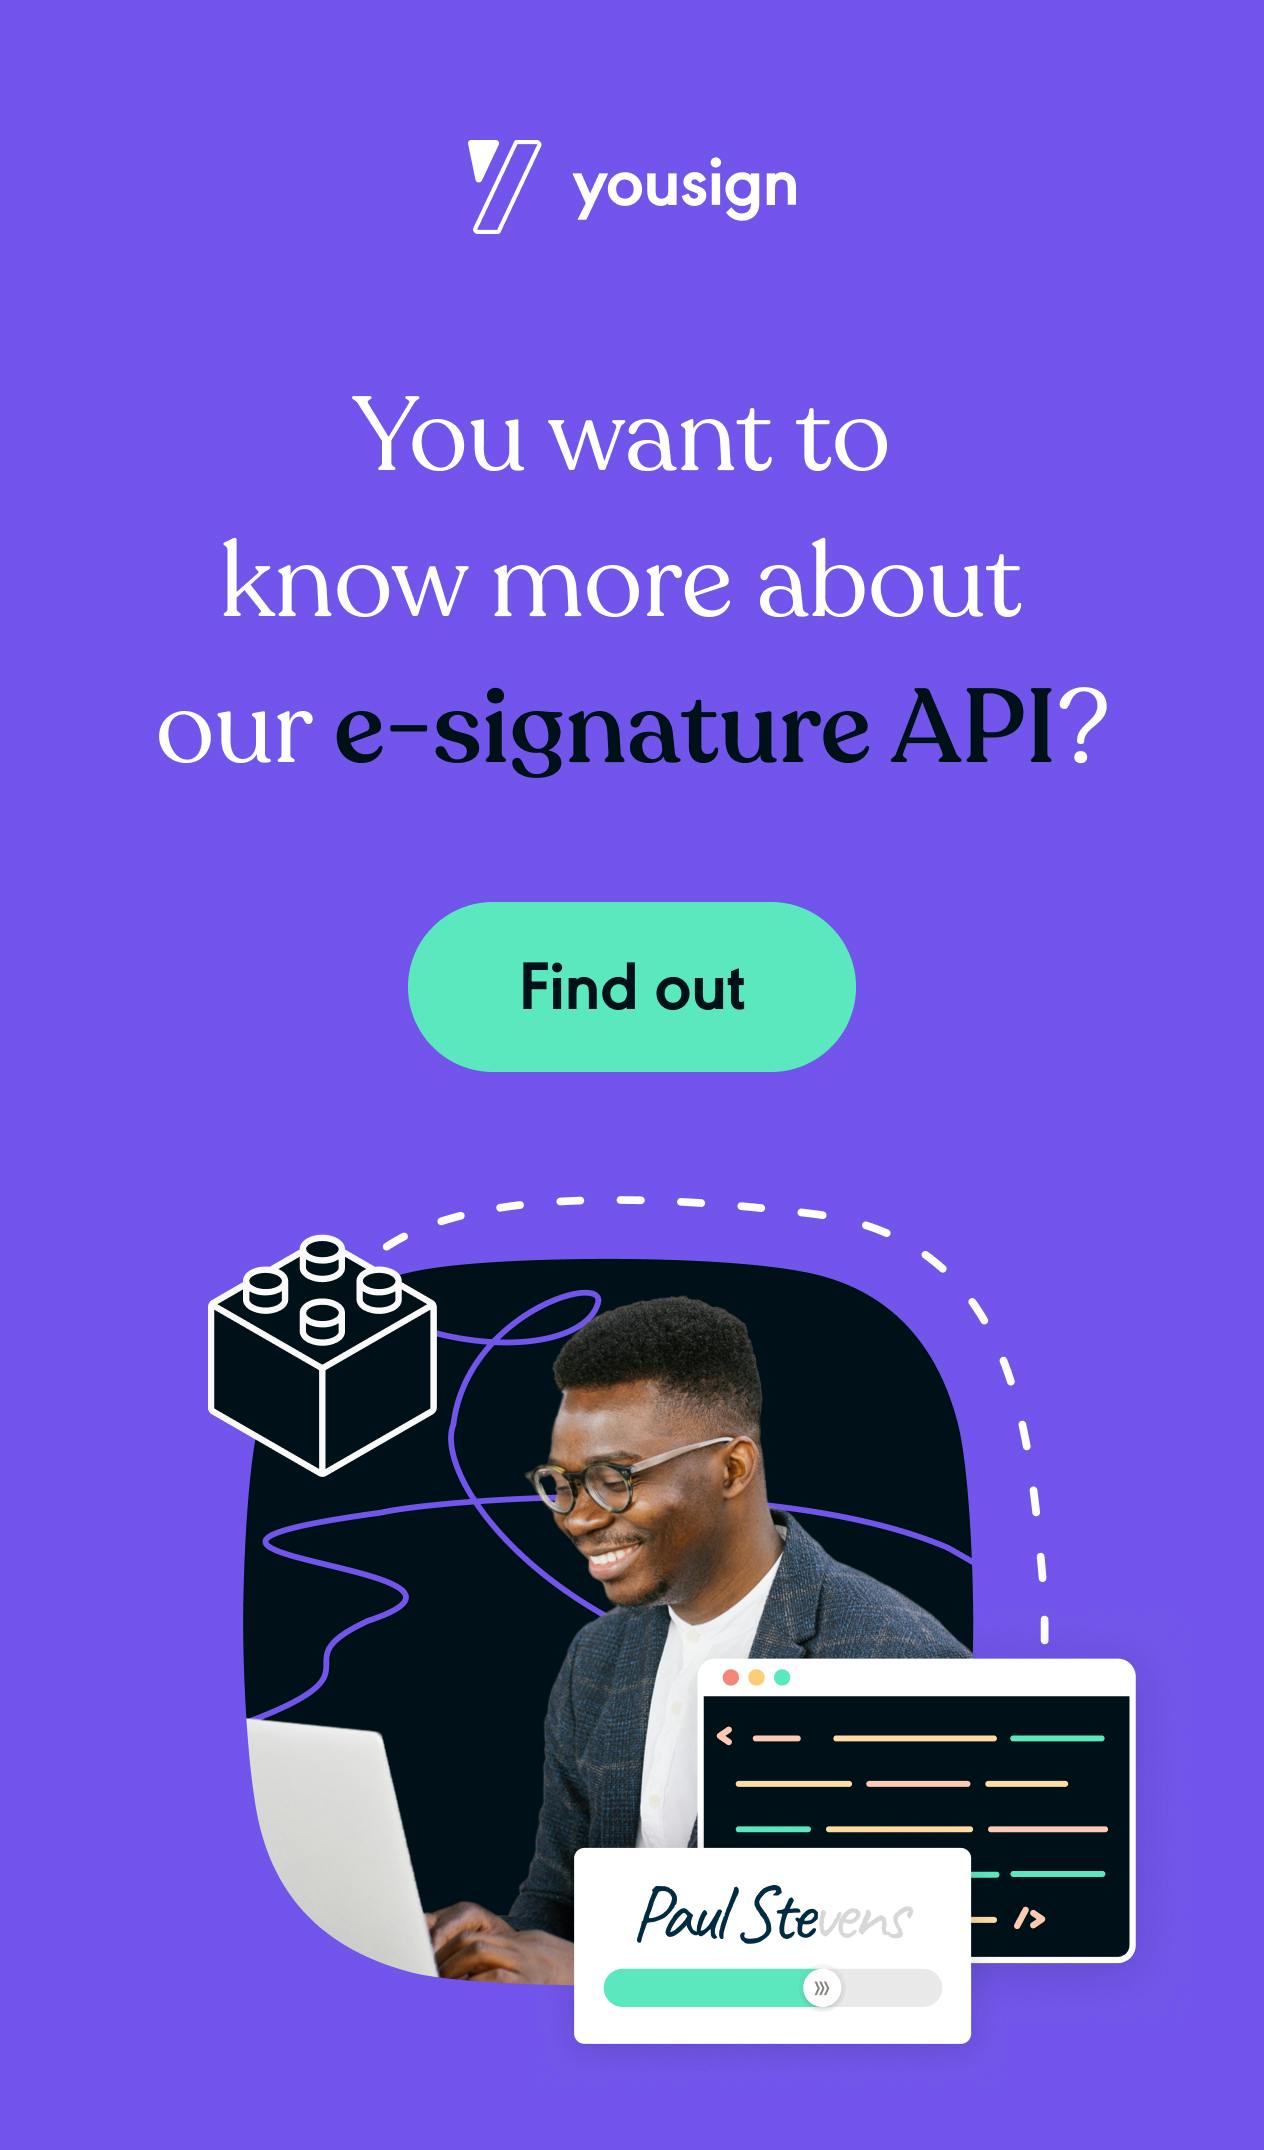 Yousign's API for e-signatures